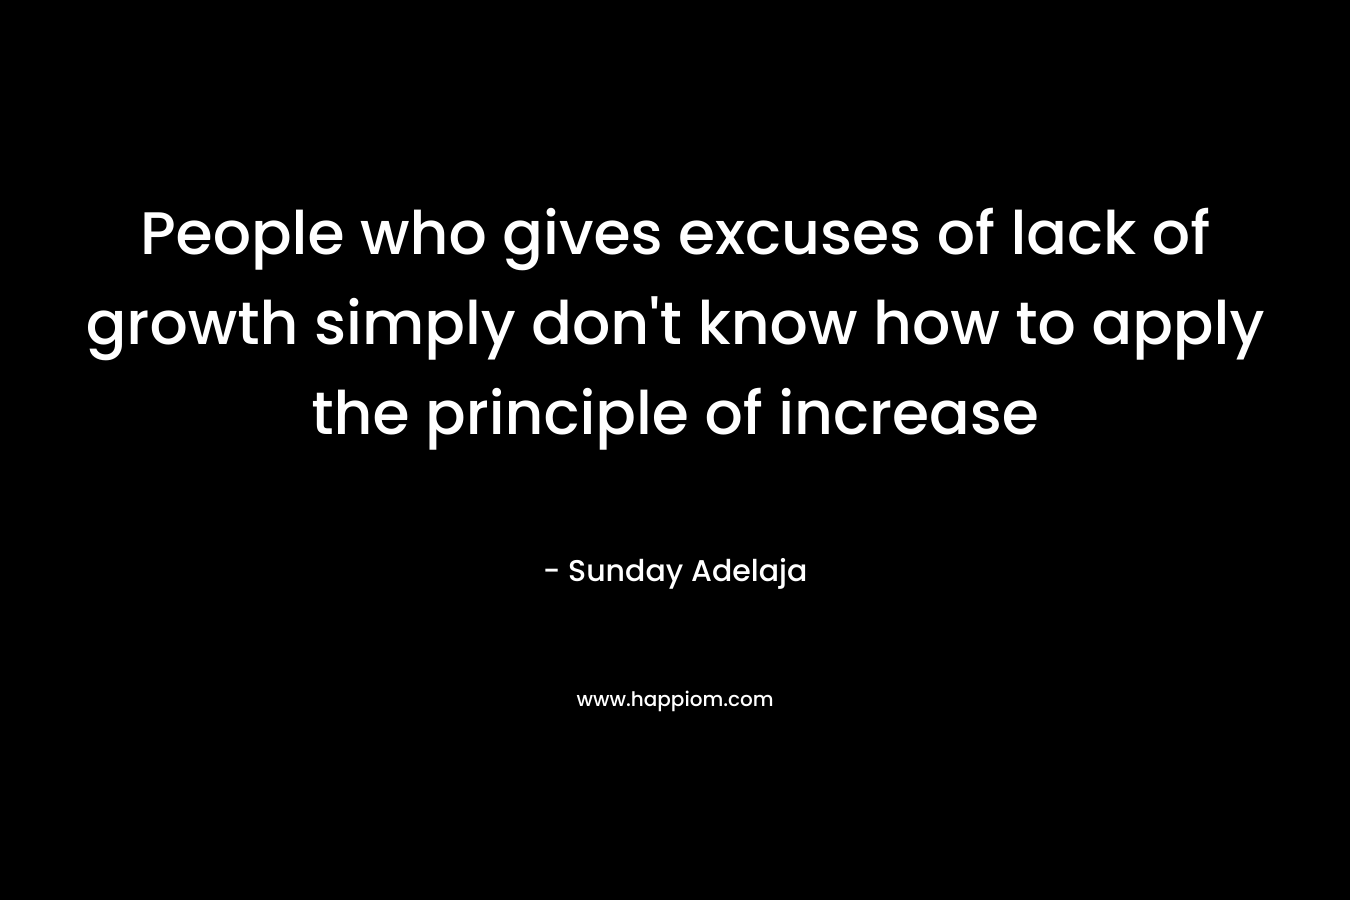 People who gives excuses of lack of growth simply don't know how to apply the principle of increase